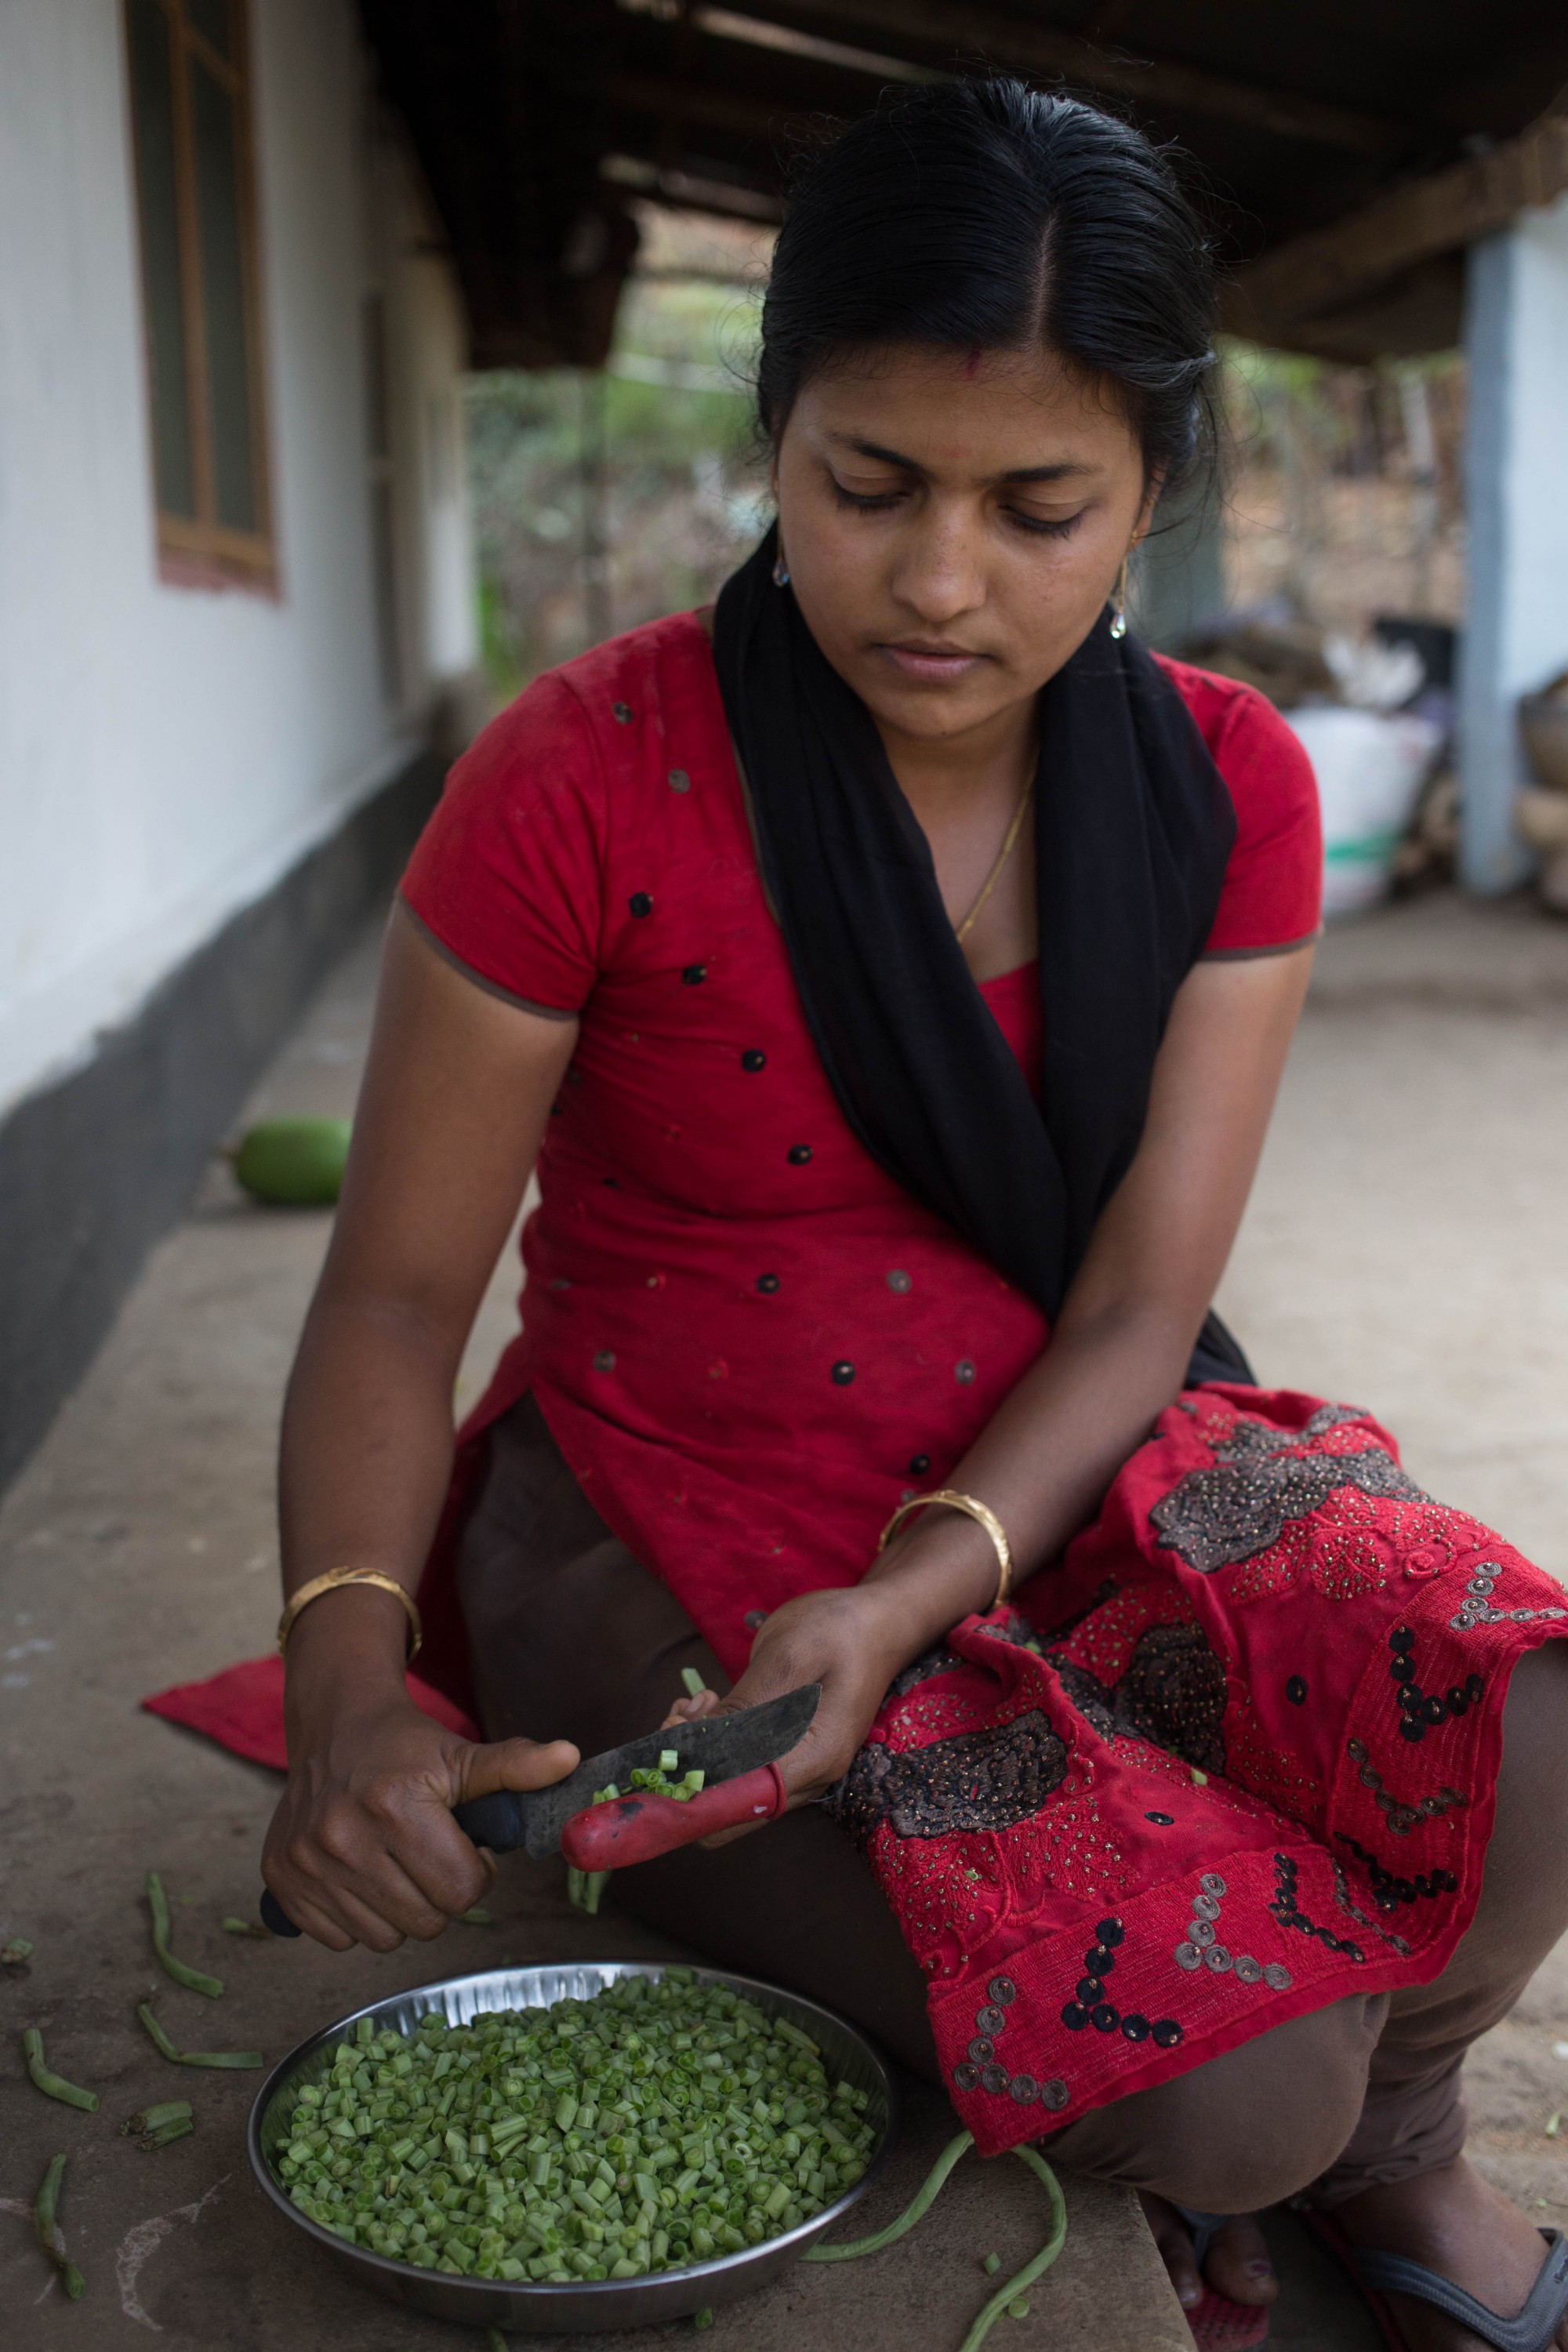 Sowmya prepares lunch in a hurry, because she’s attending the big, annual harvest festival in the village. And Sowmya gets to catch up with her friends.